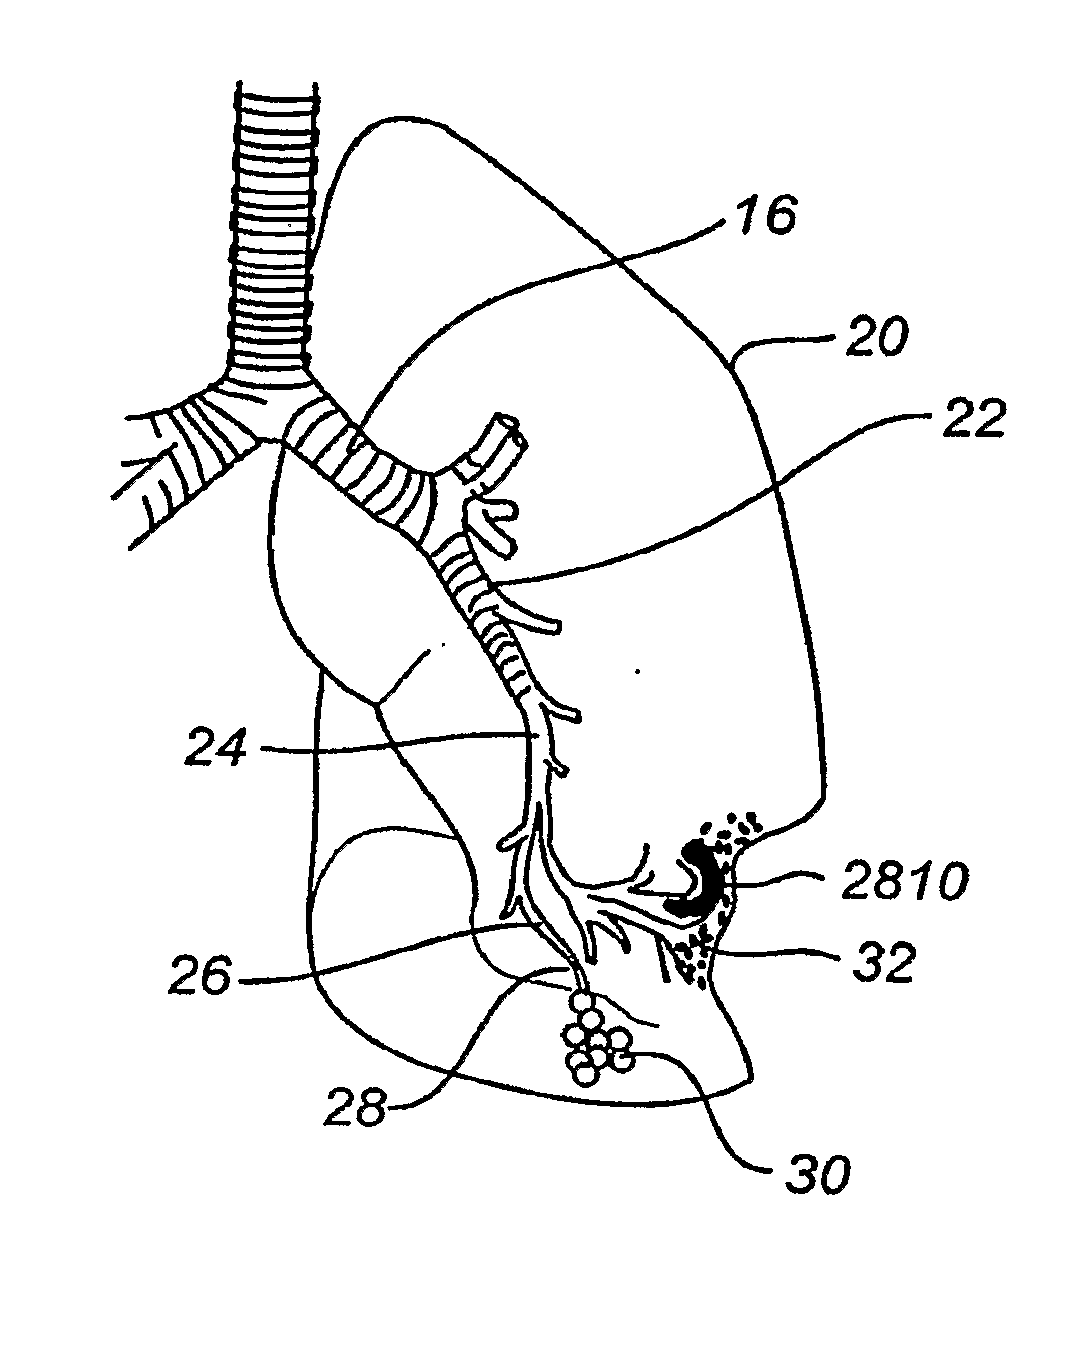 Minimally invasive lung volume reduction devices, methods, and systems